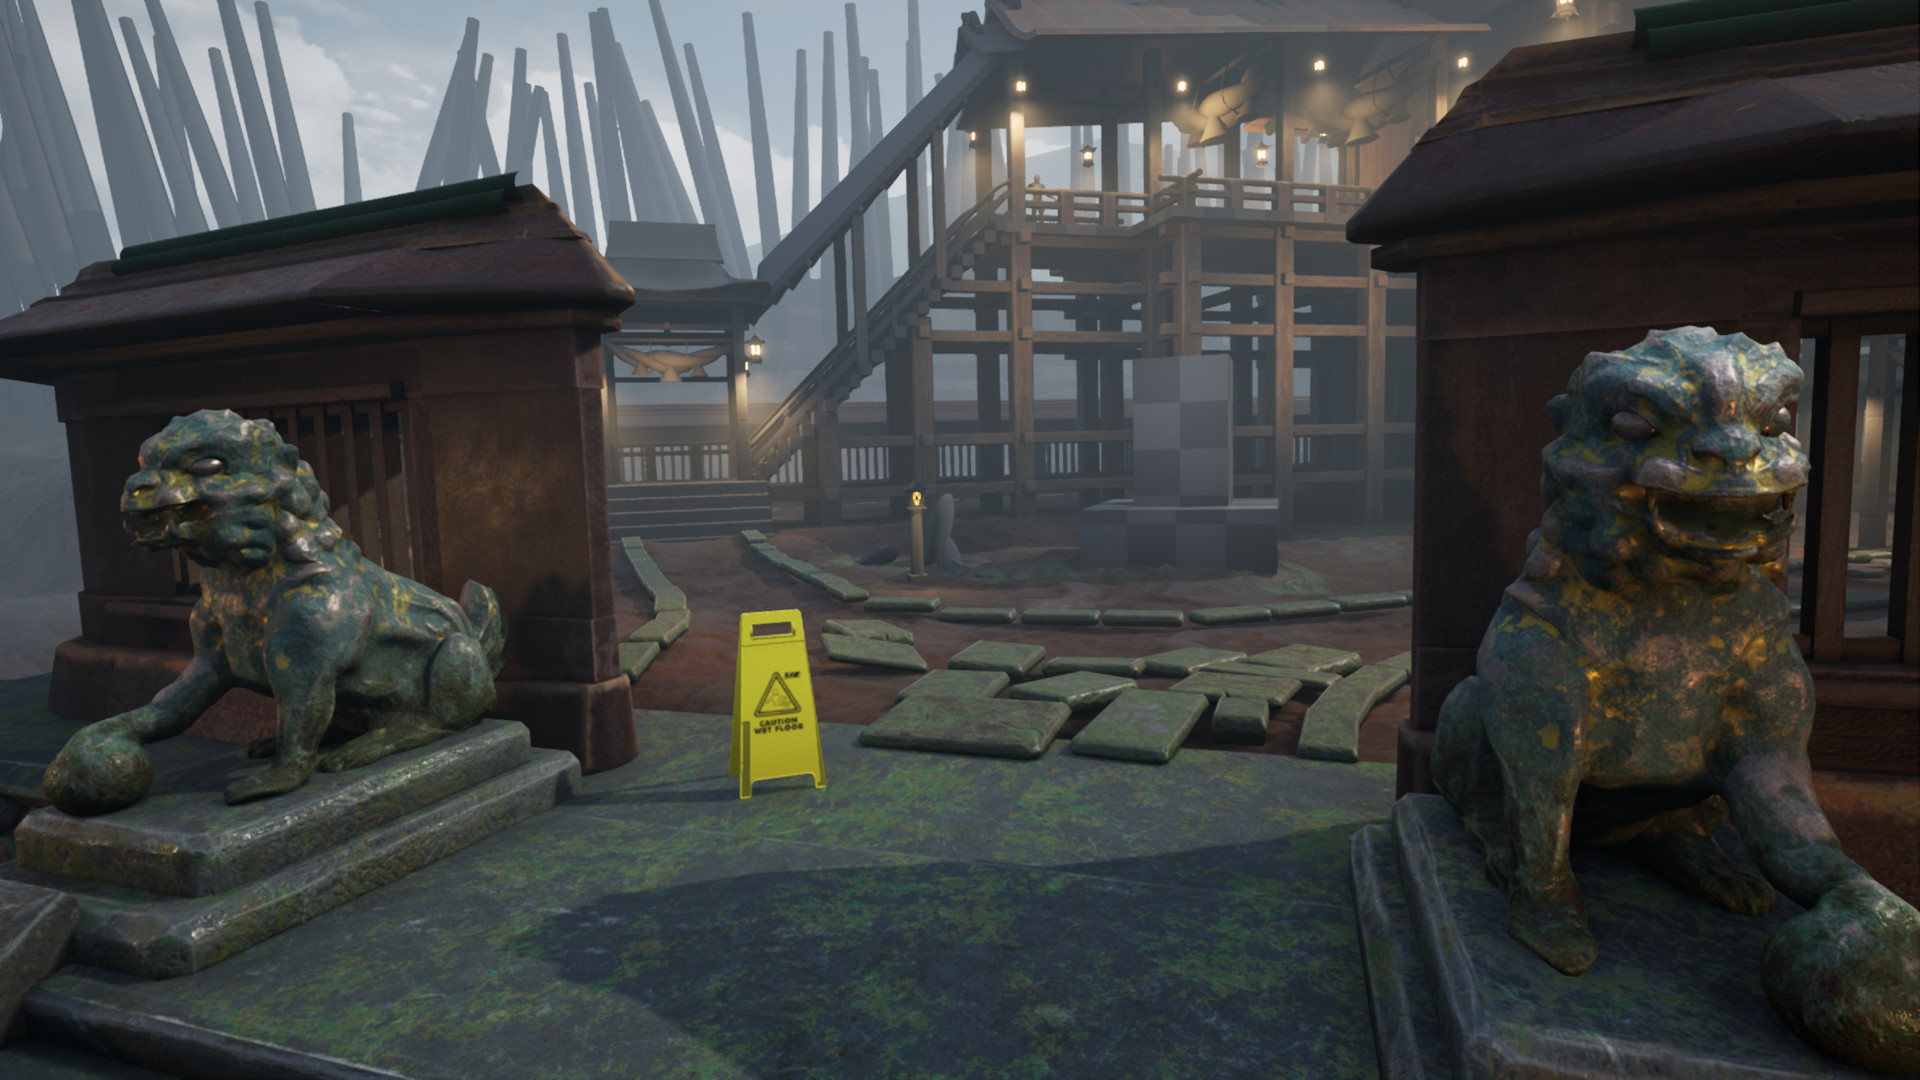 Screenshot of the staircase section with the Foo Dogs. There is stone path under construction with stones scattered about but not yet placed in a good, final arrangement. In front is a yellow sign that reads “CAUTION WET FLOOR”.